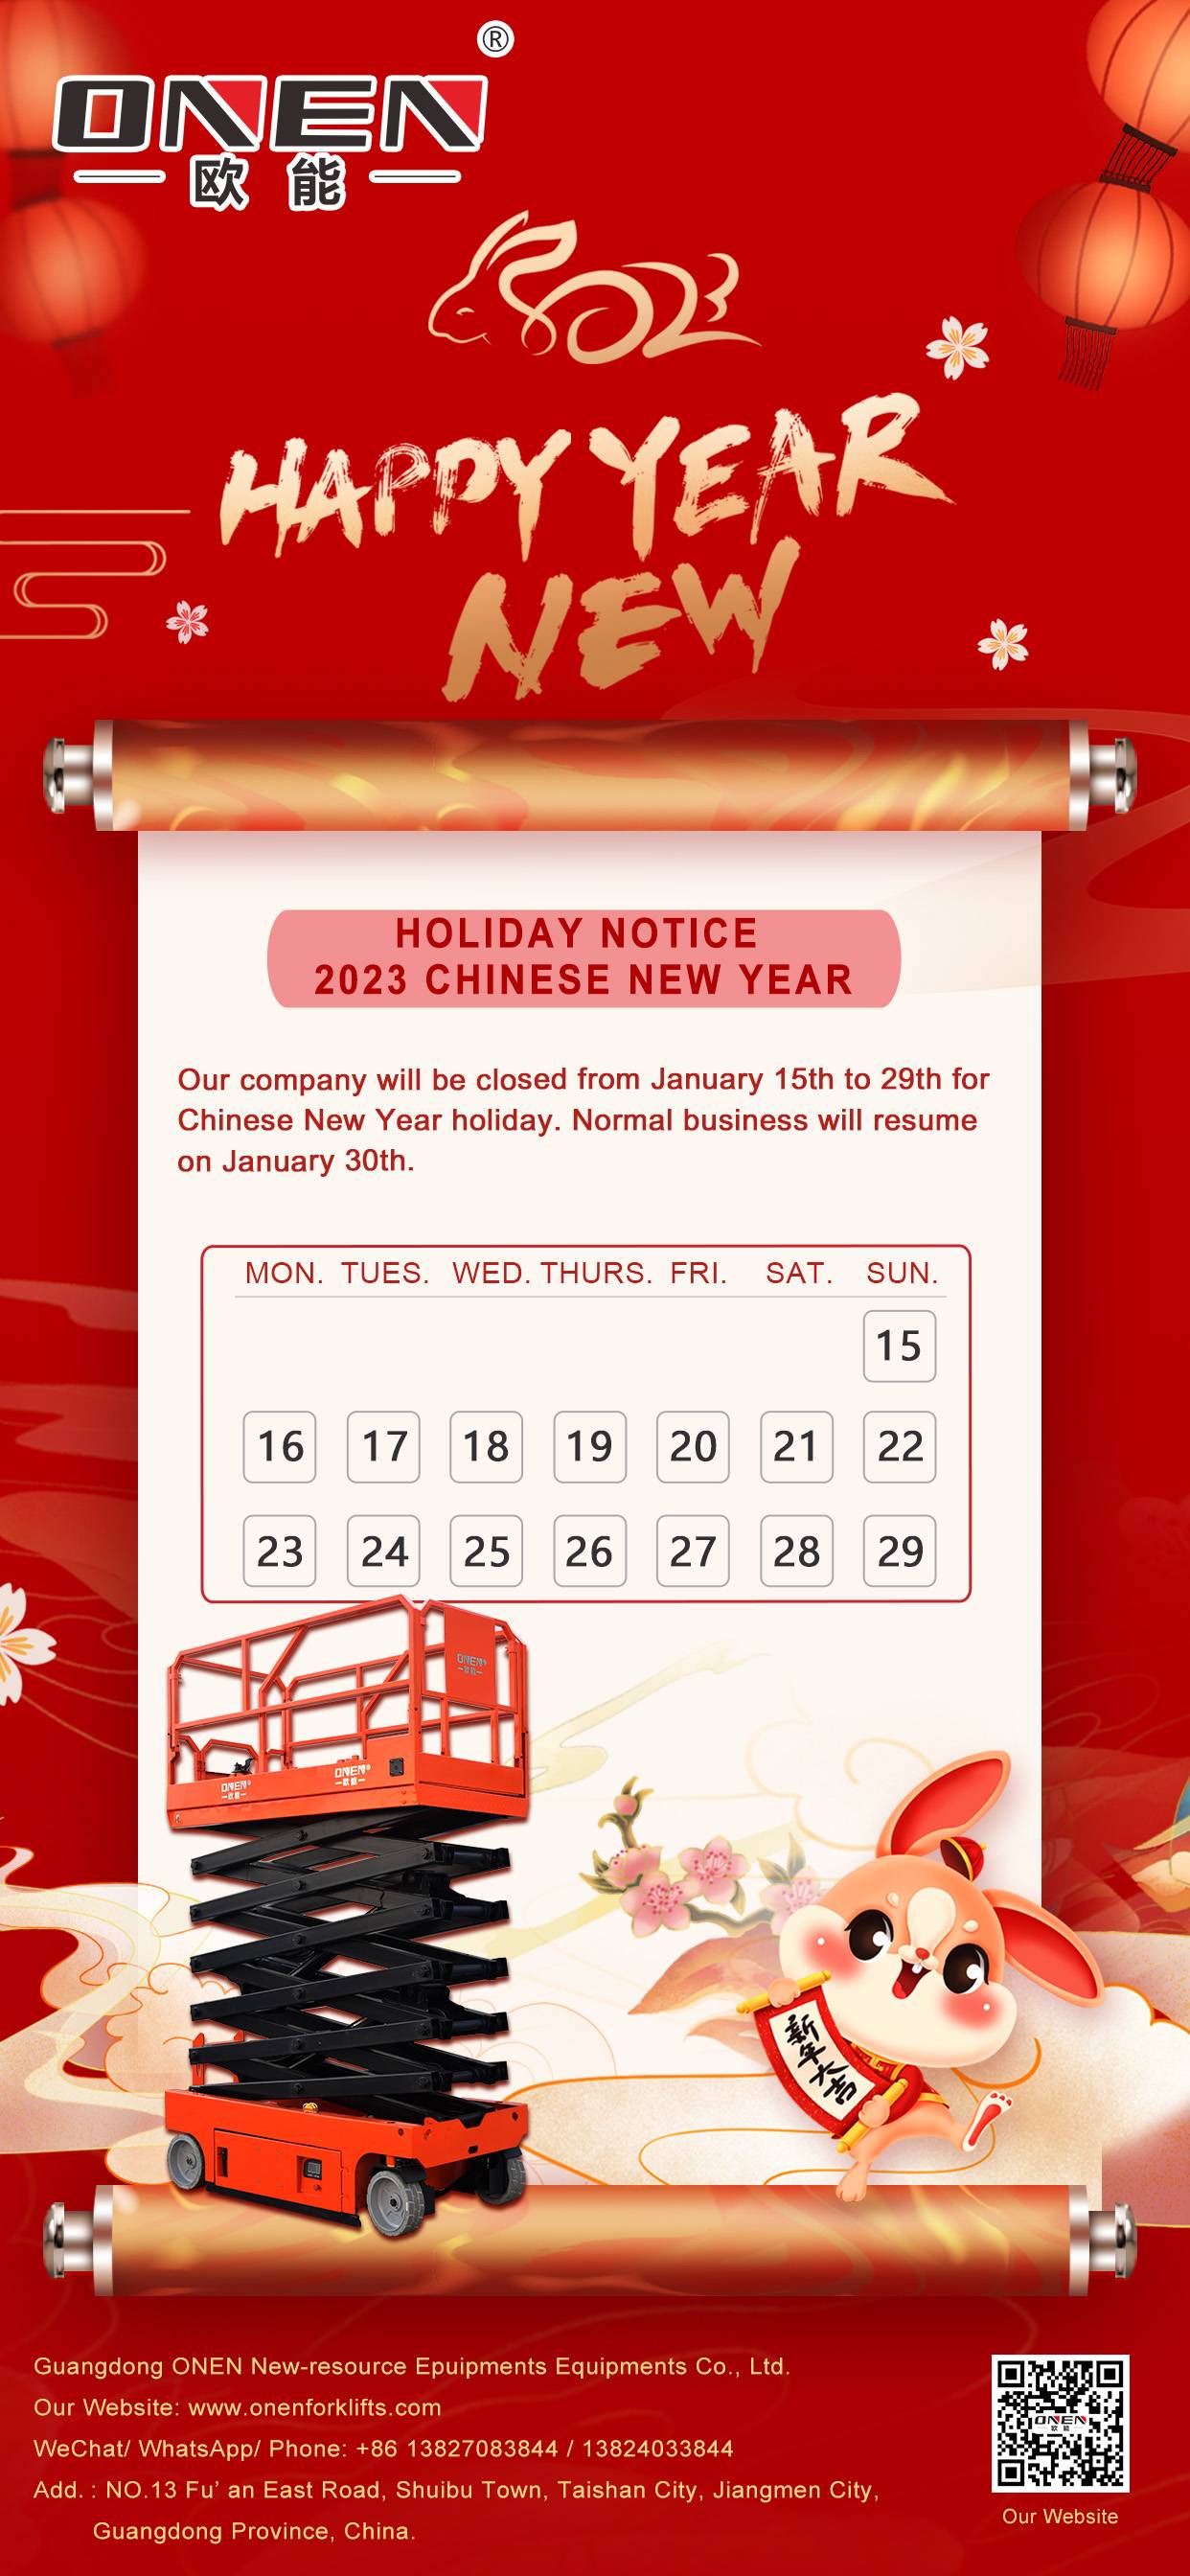 HOLIDAY NOTICE 2023---CHINESE NEW YEAR